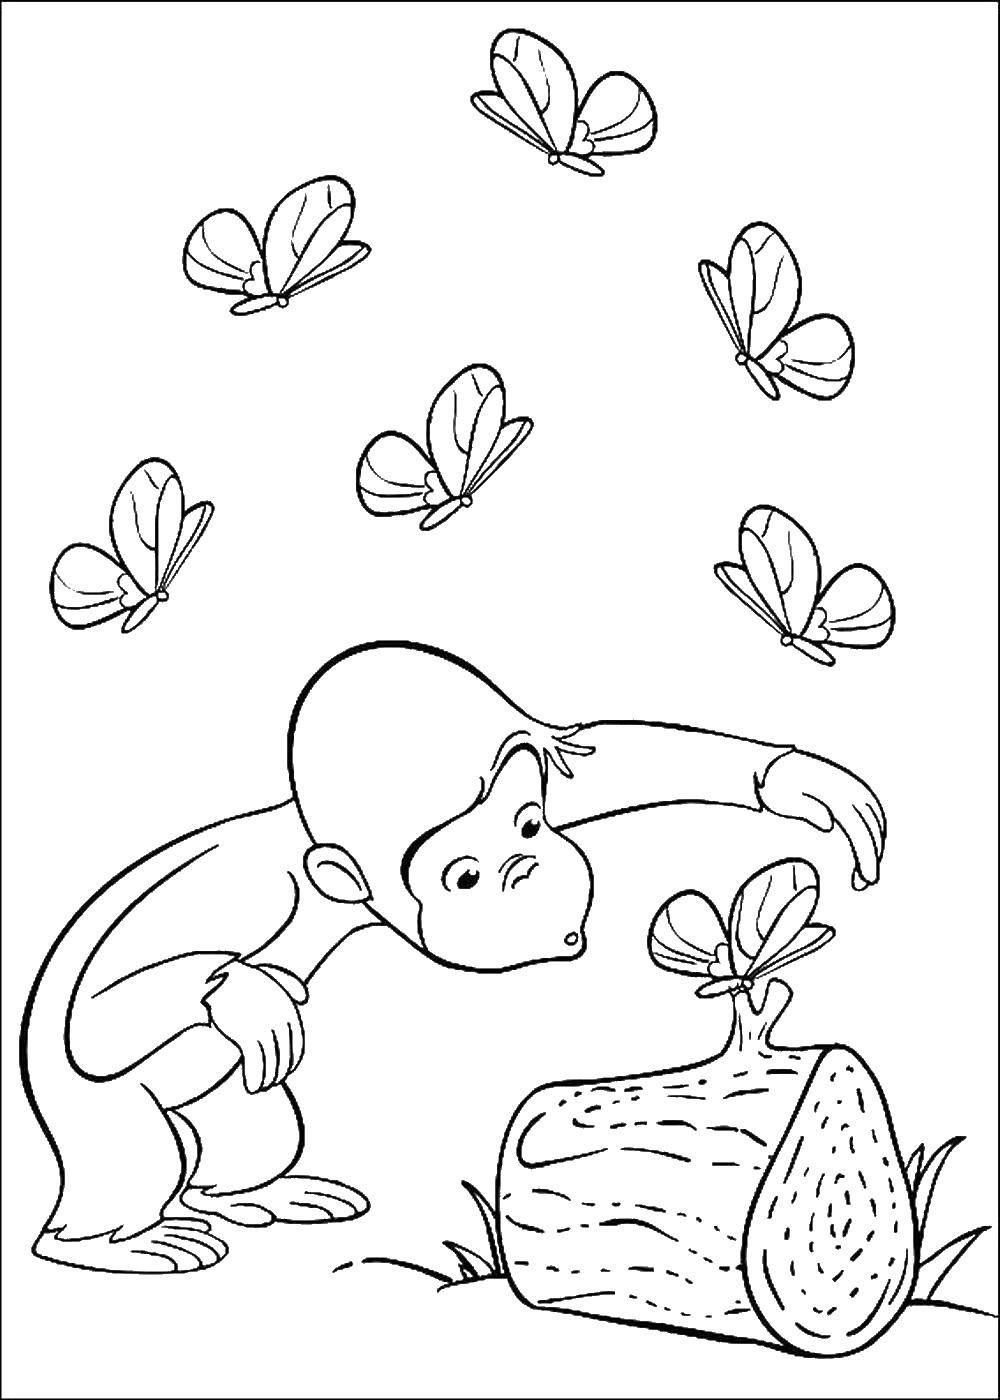 Coloring Butterfly and monkey. Category coloring. Tags:  monkey, butterfly.